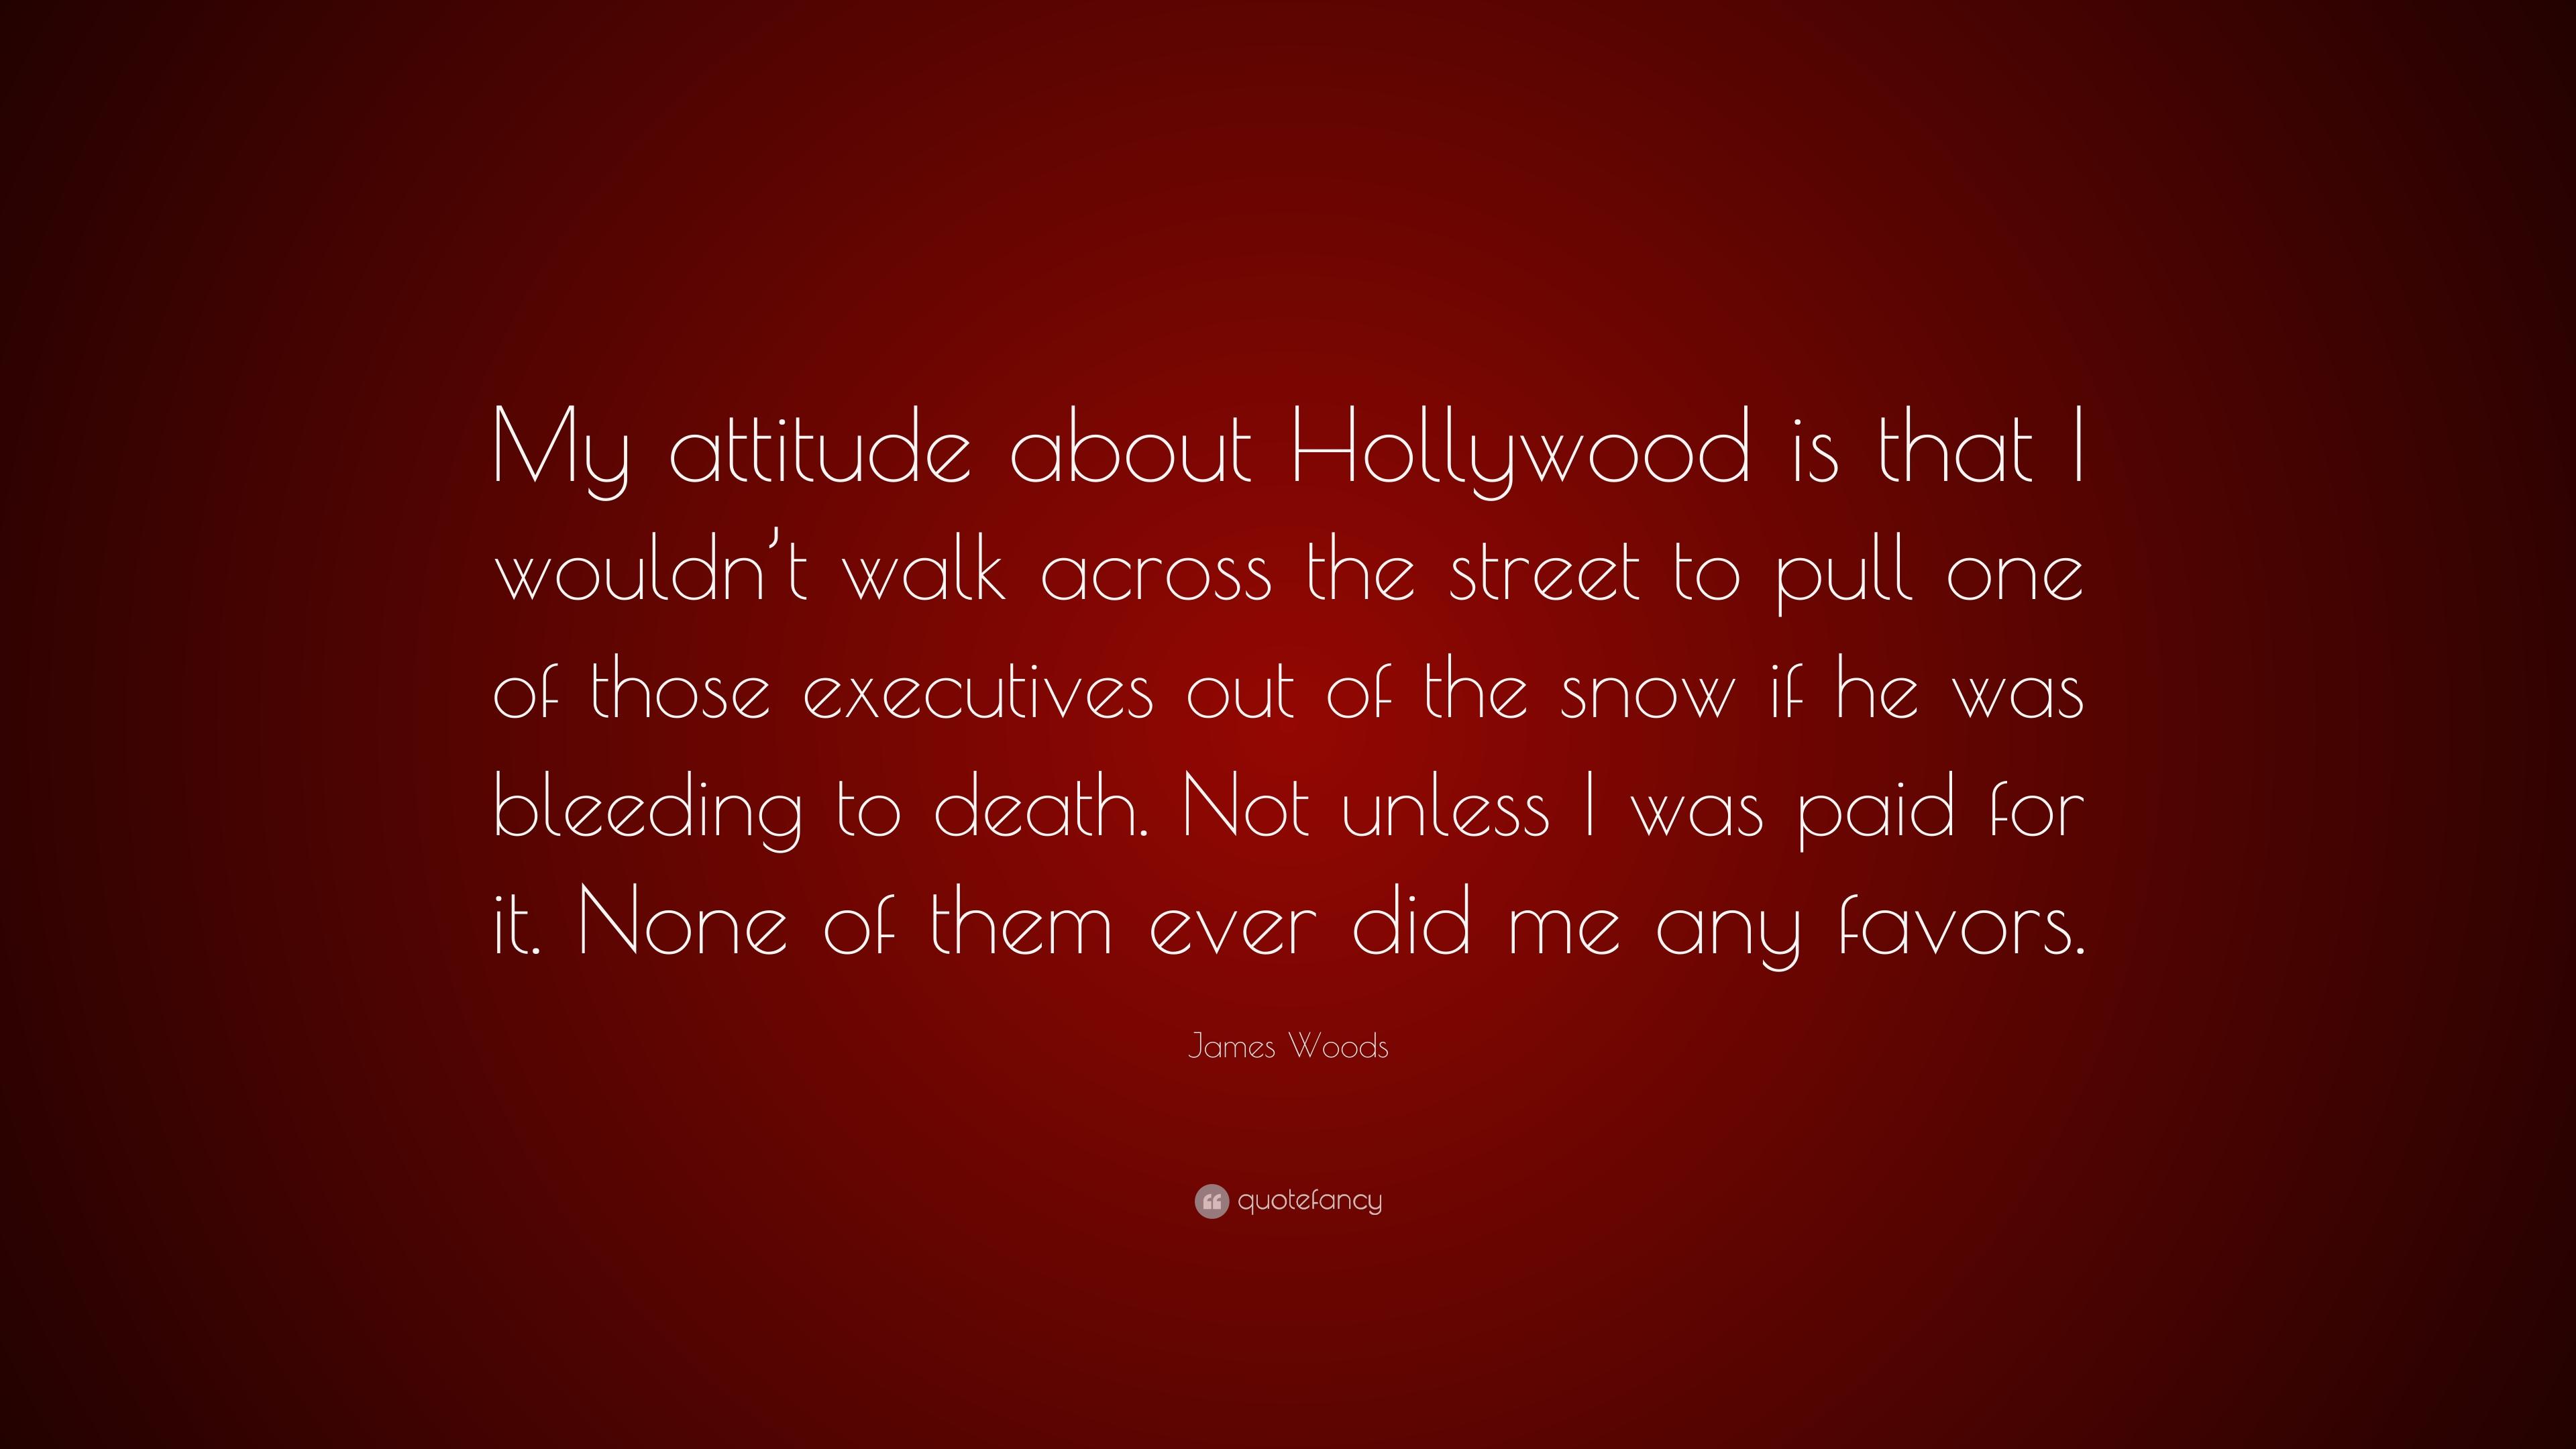 James Woods Quote: "My attitude about Hollywood is that I 